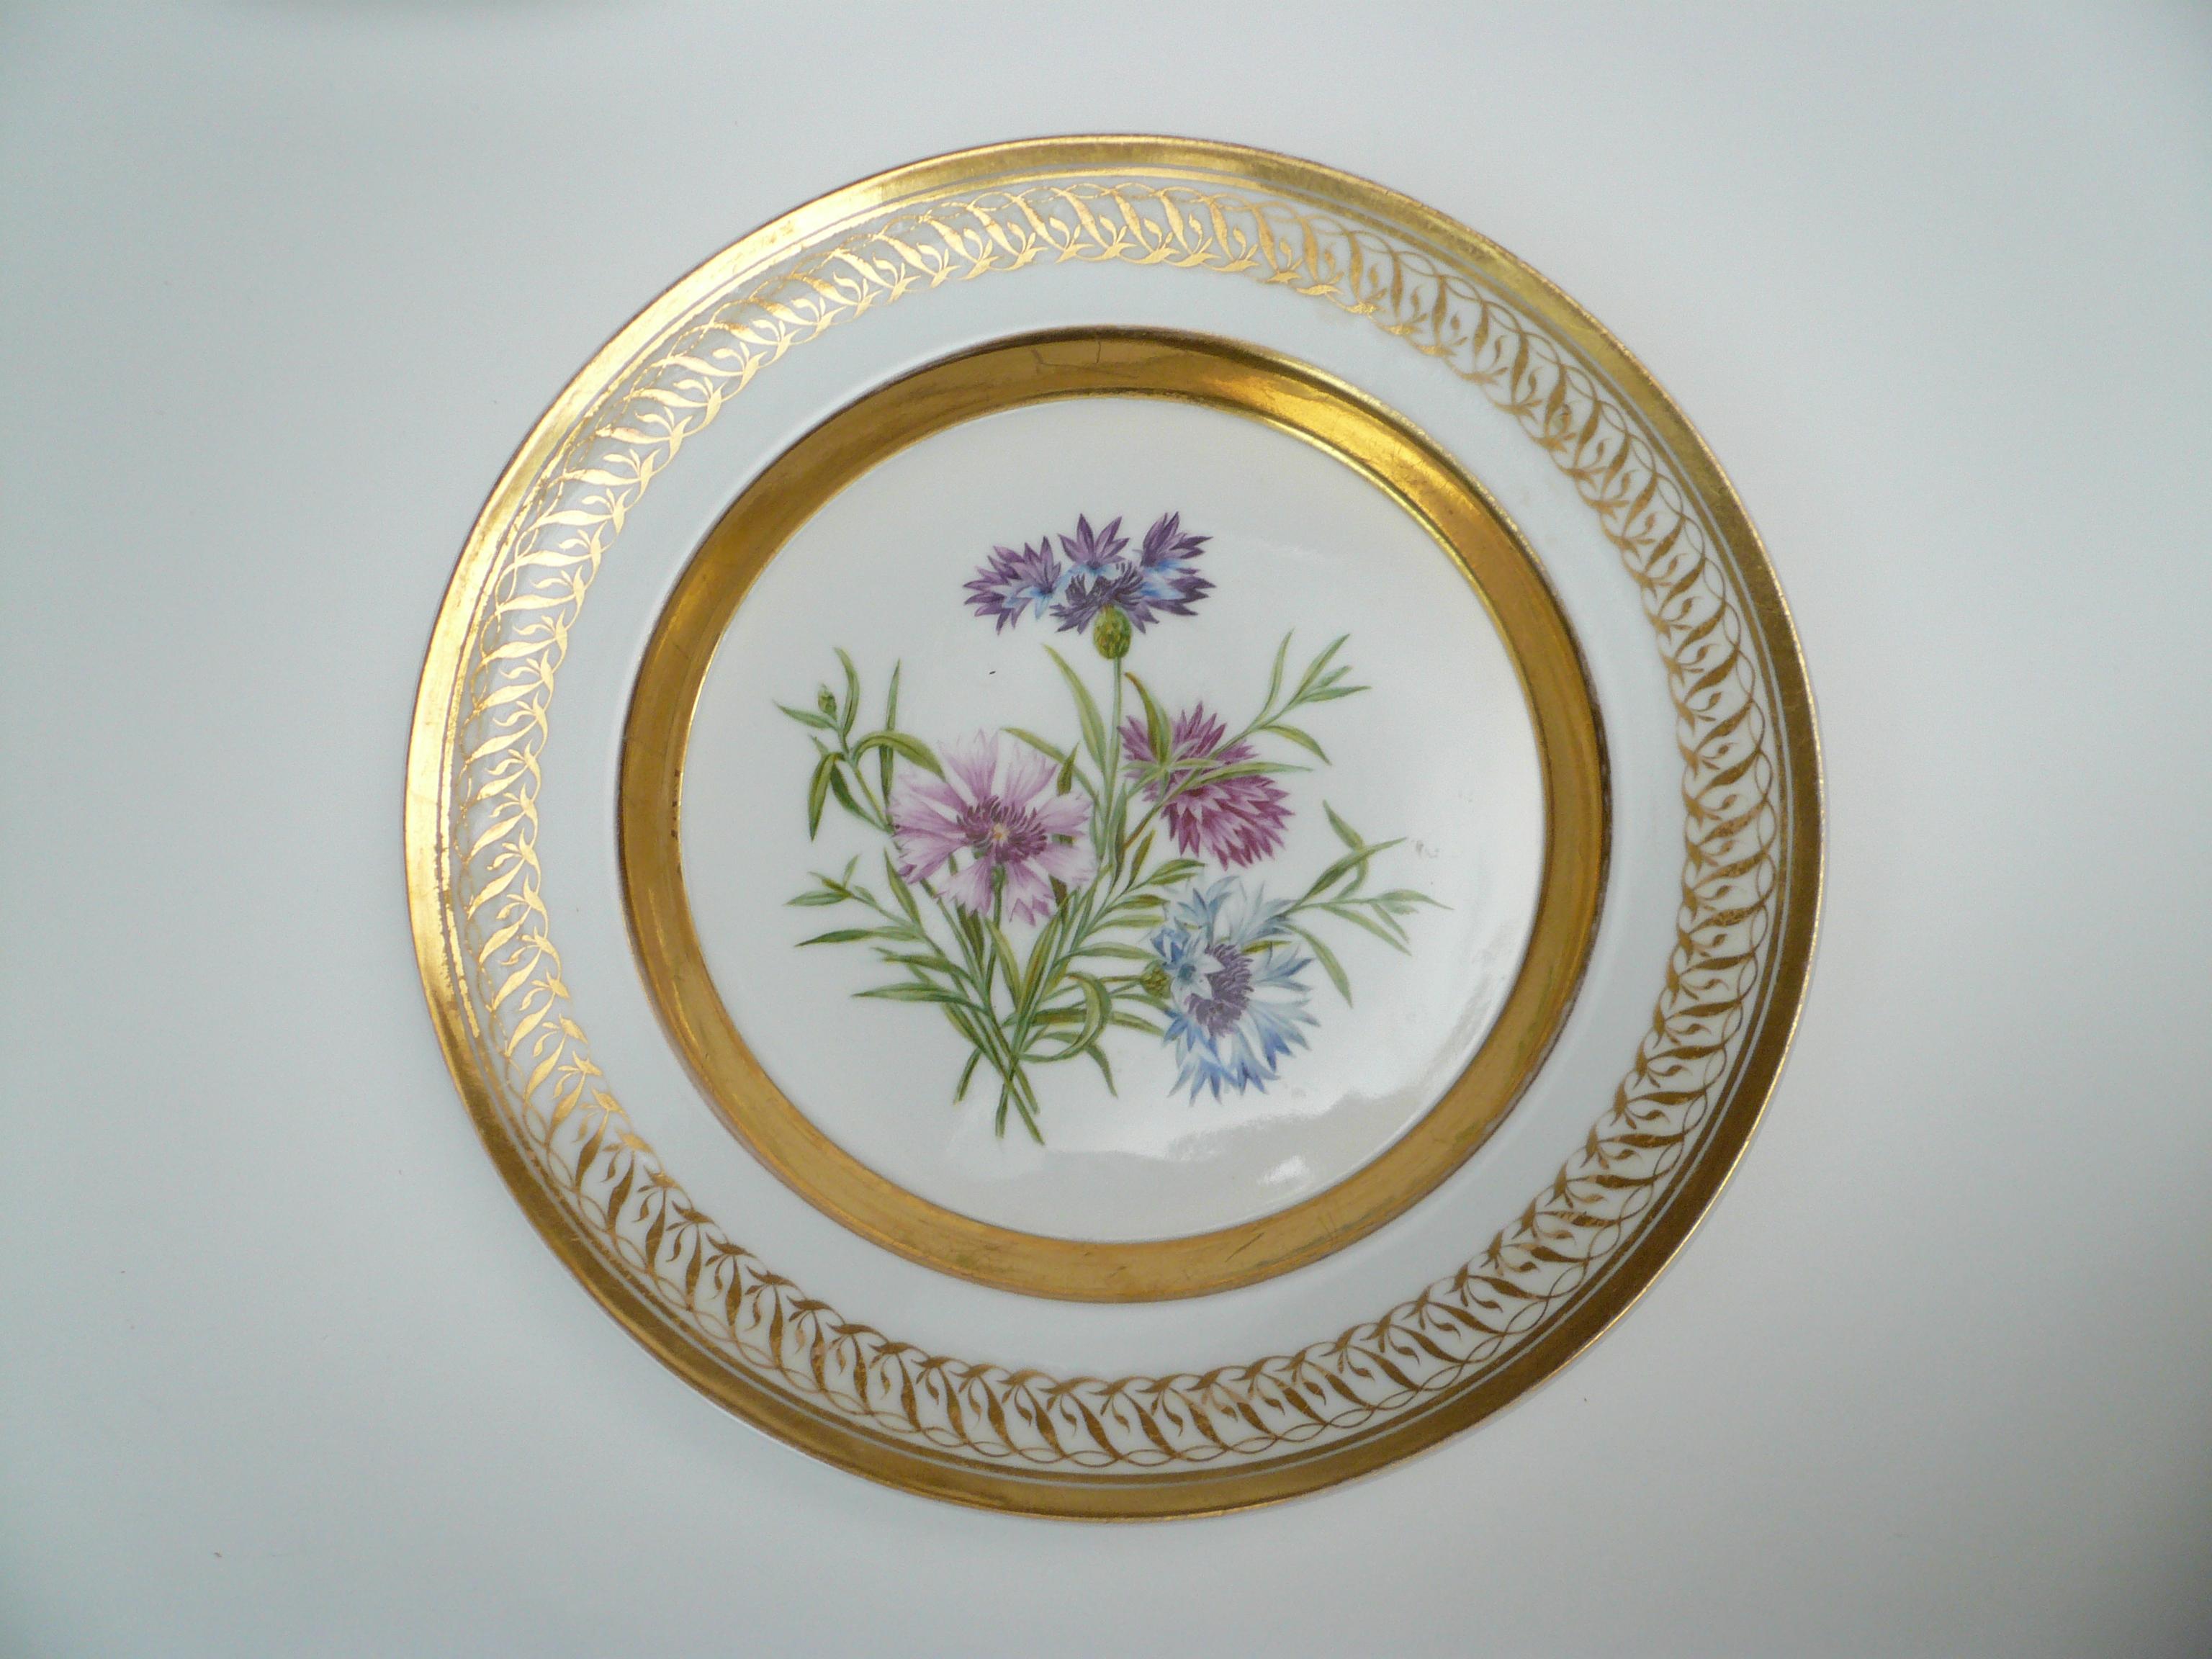 This beautifully hand painted Berlin porcelain plate features Centaurea Cyanus (cornflower) decoration, and a fine gilded border.